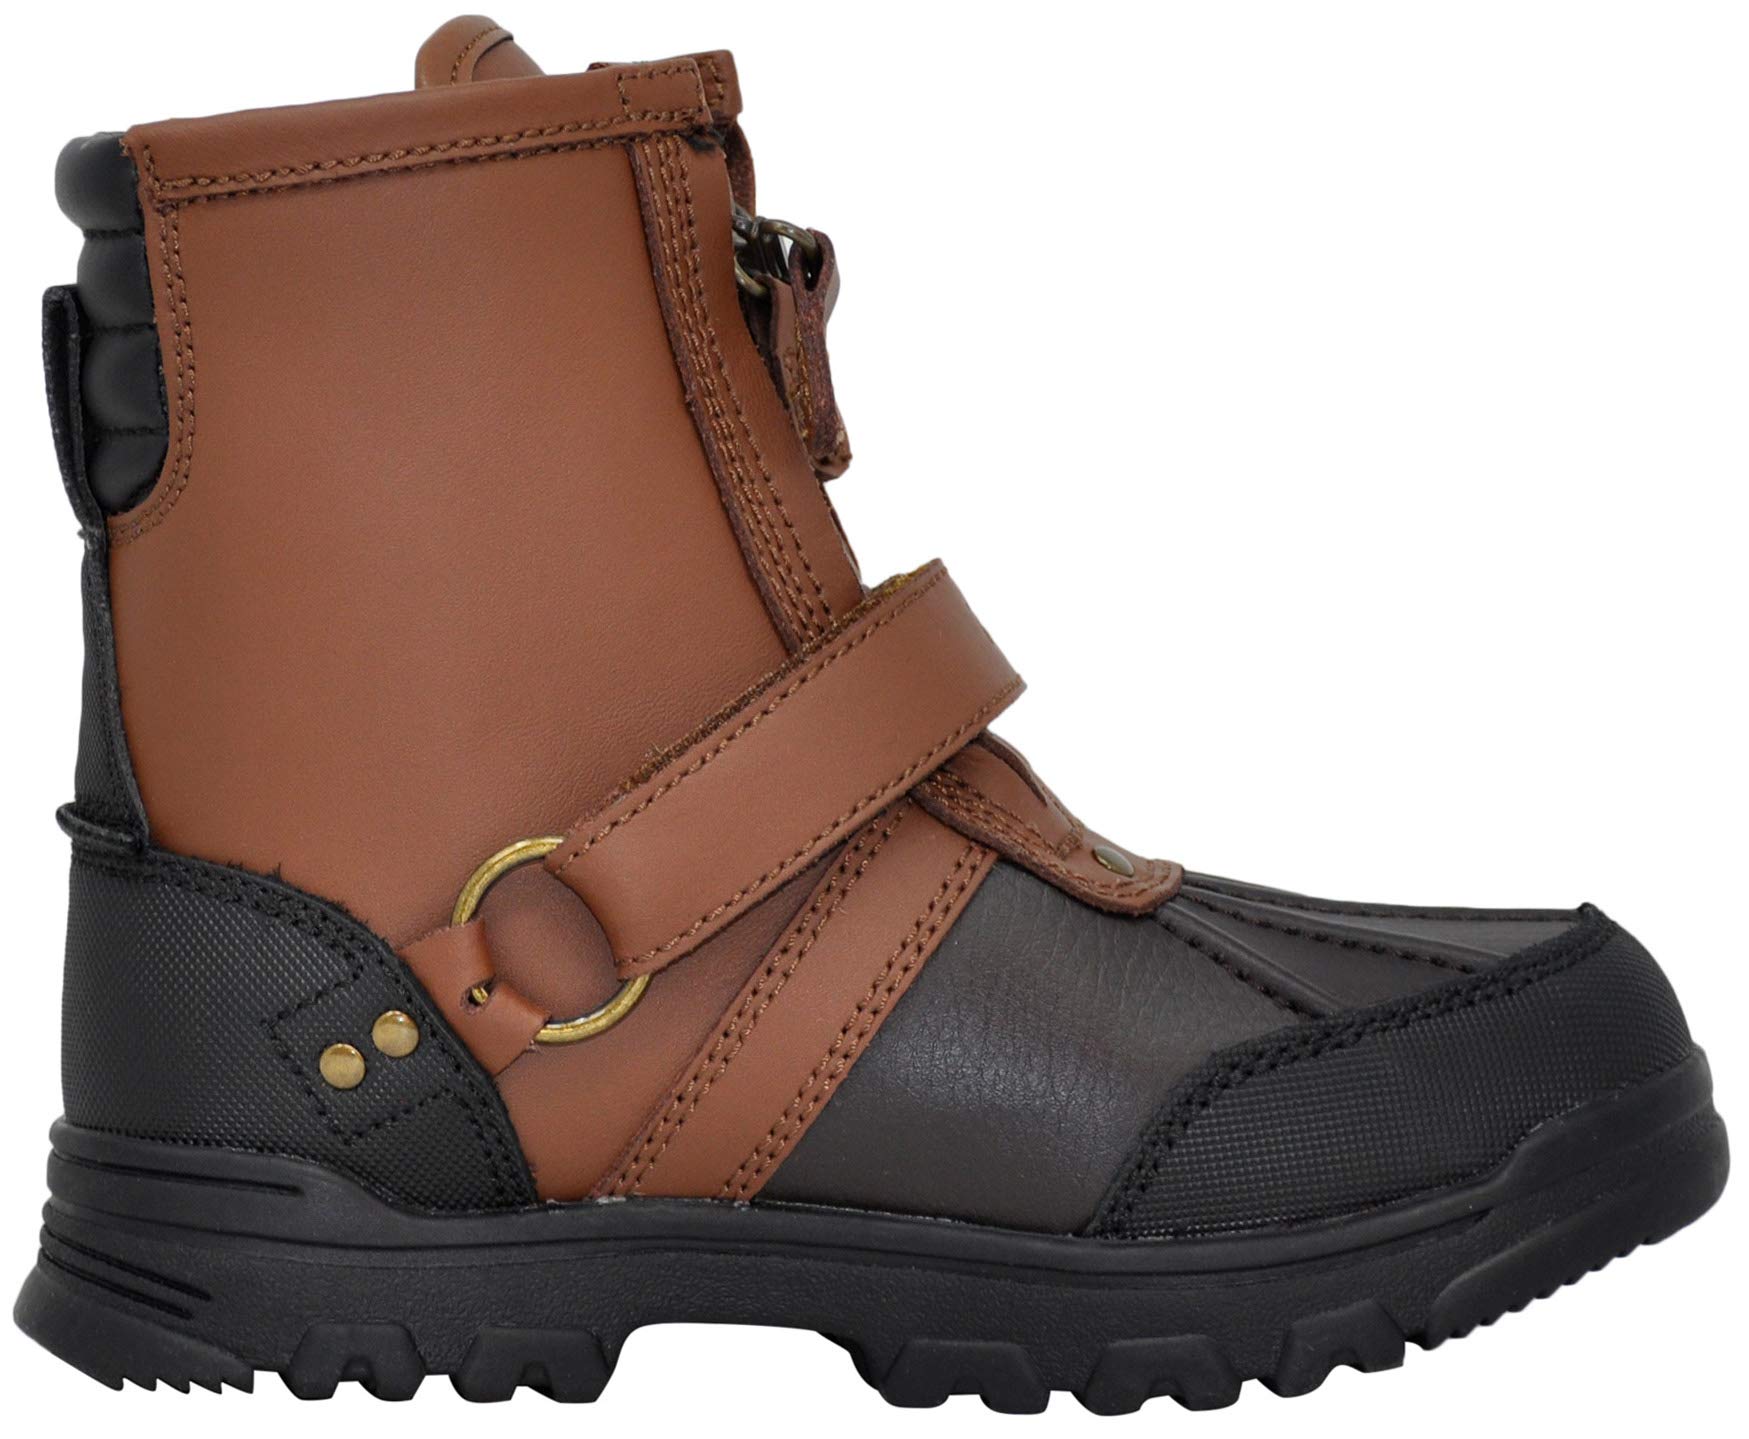 POLO RALPH LAUREN Boys Conquered Hi Boot, Chocolate/Tan Leather, 9 Toddler